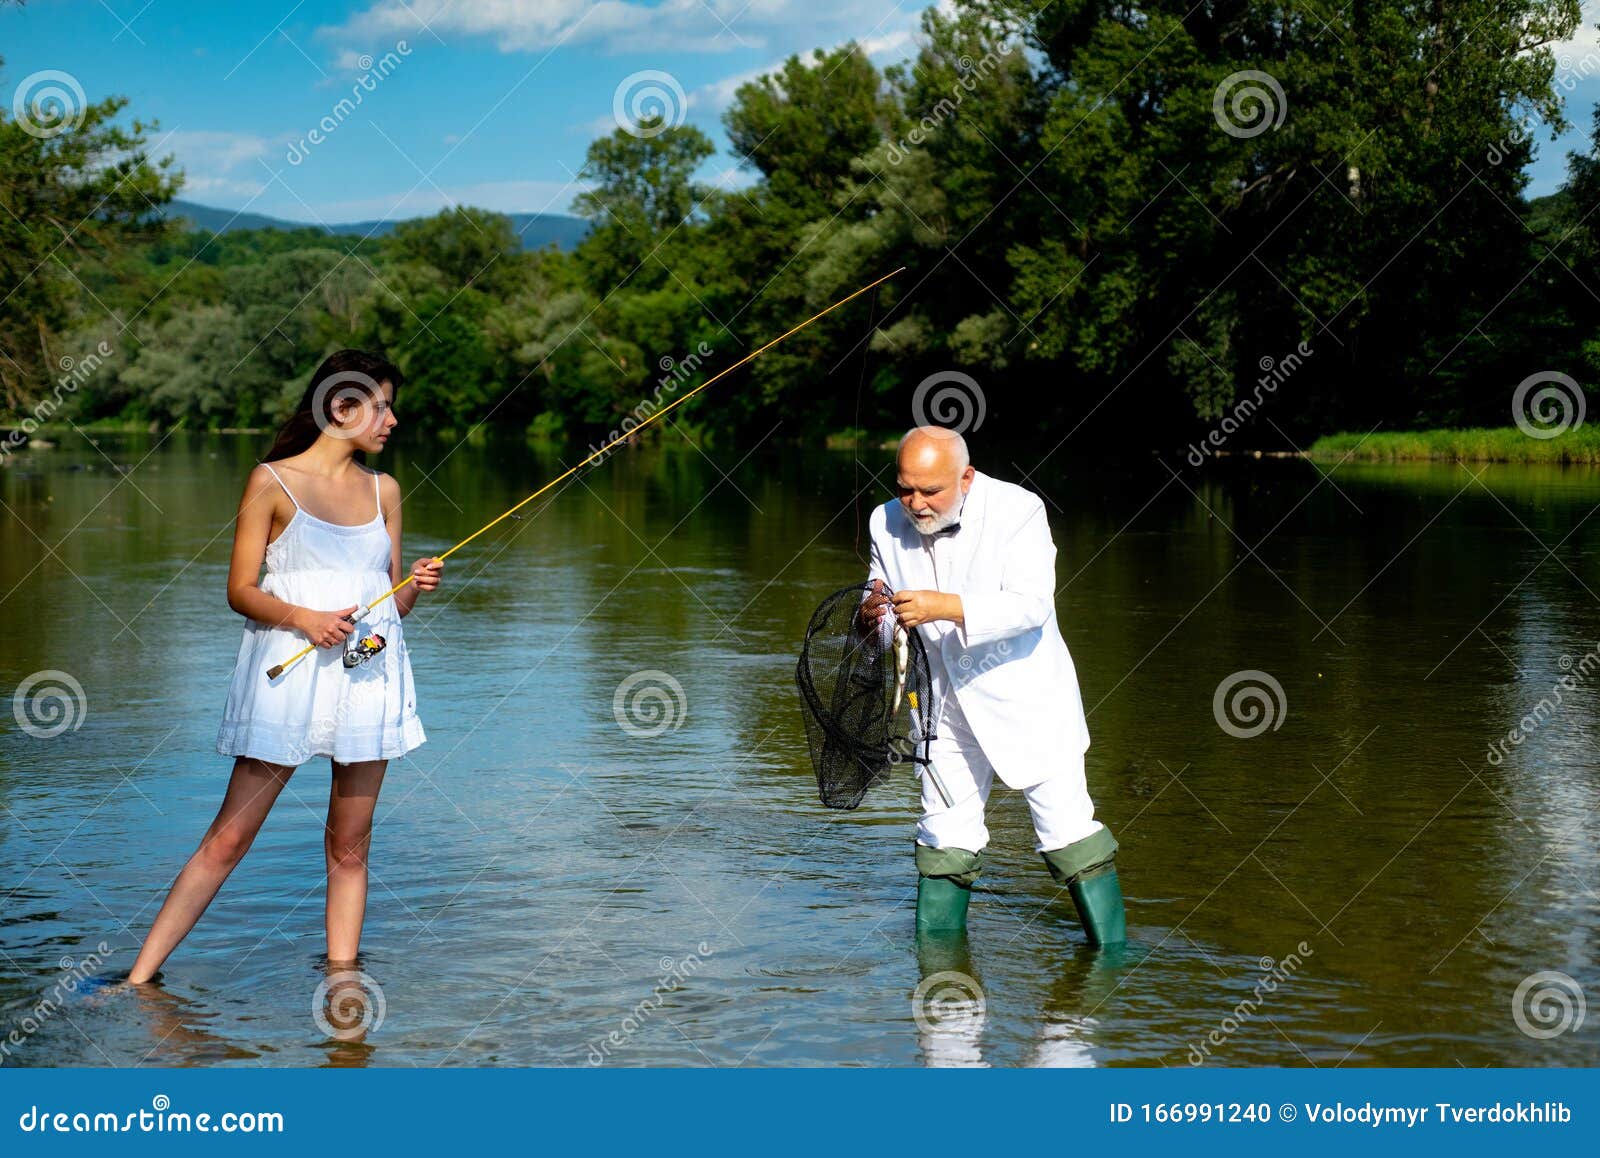 Handsome Mature Man Fishing with Young Woman in White Dress. Man with  Fishing Rod and Net. Happy Bearded Fisher in Water Stock Photo - Image of  gray, female: 166991240